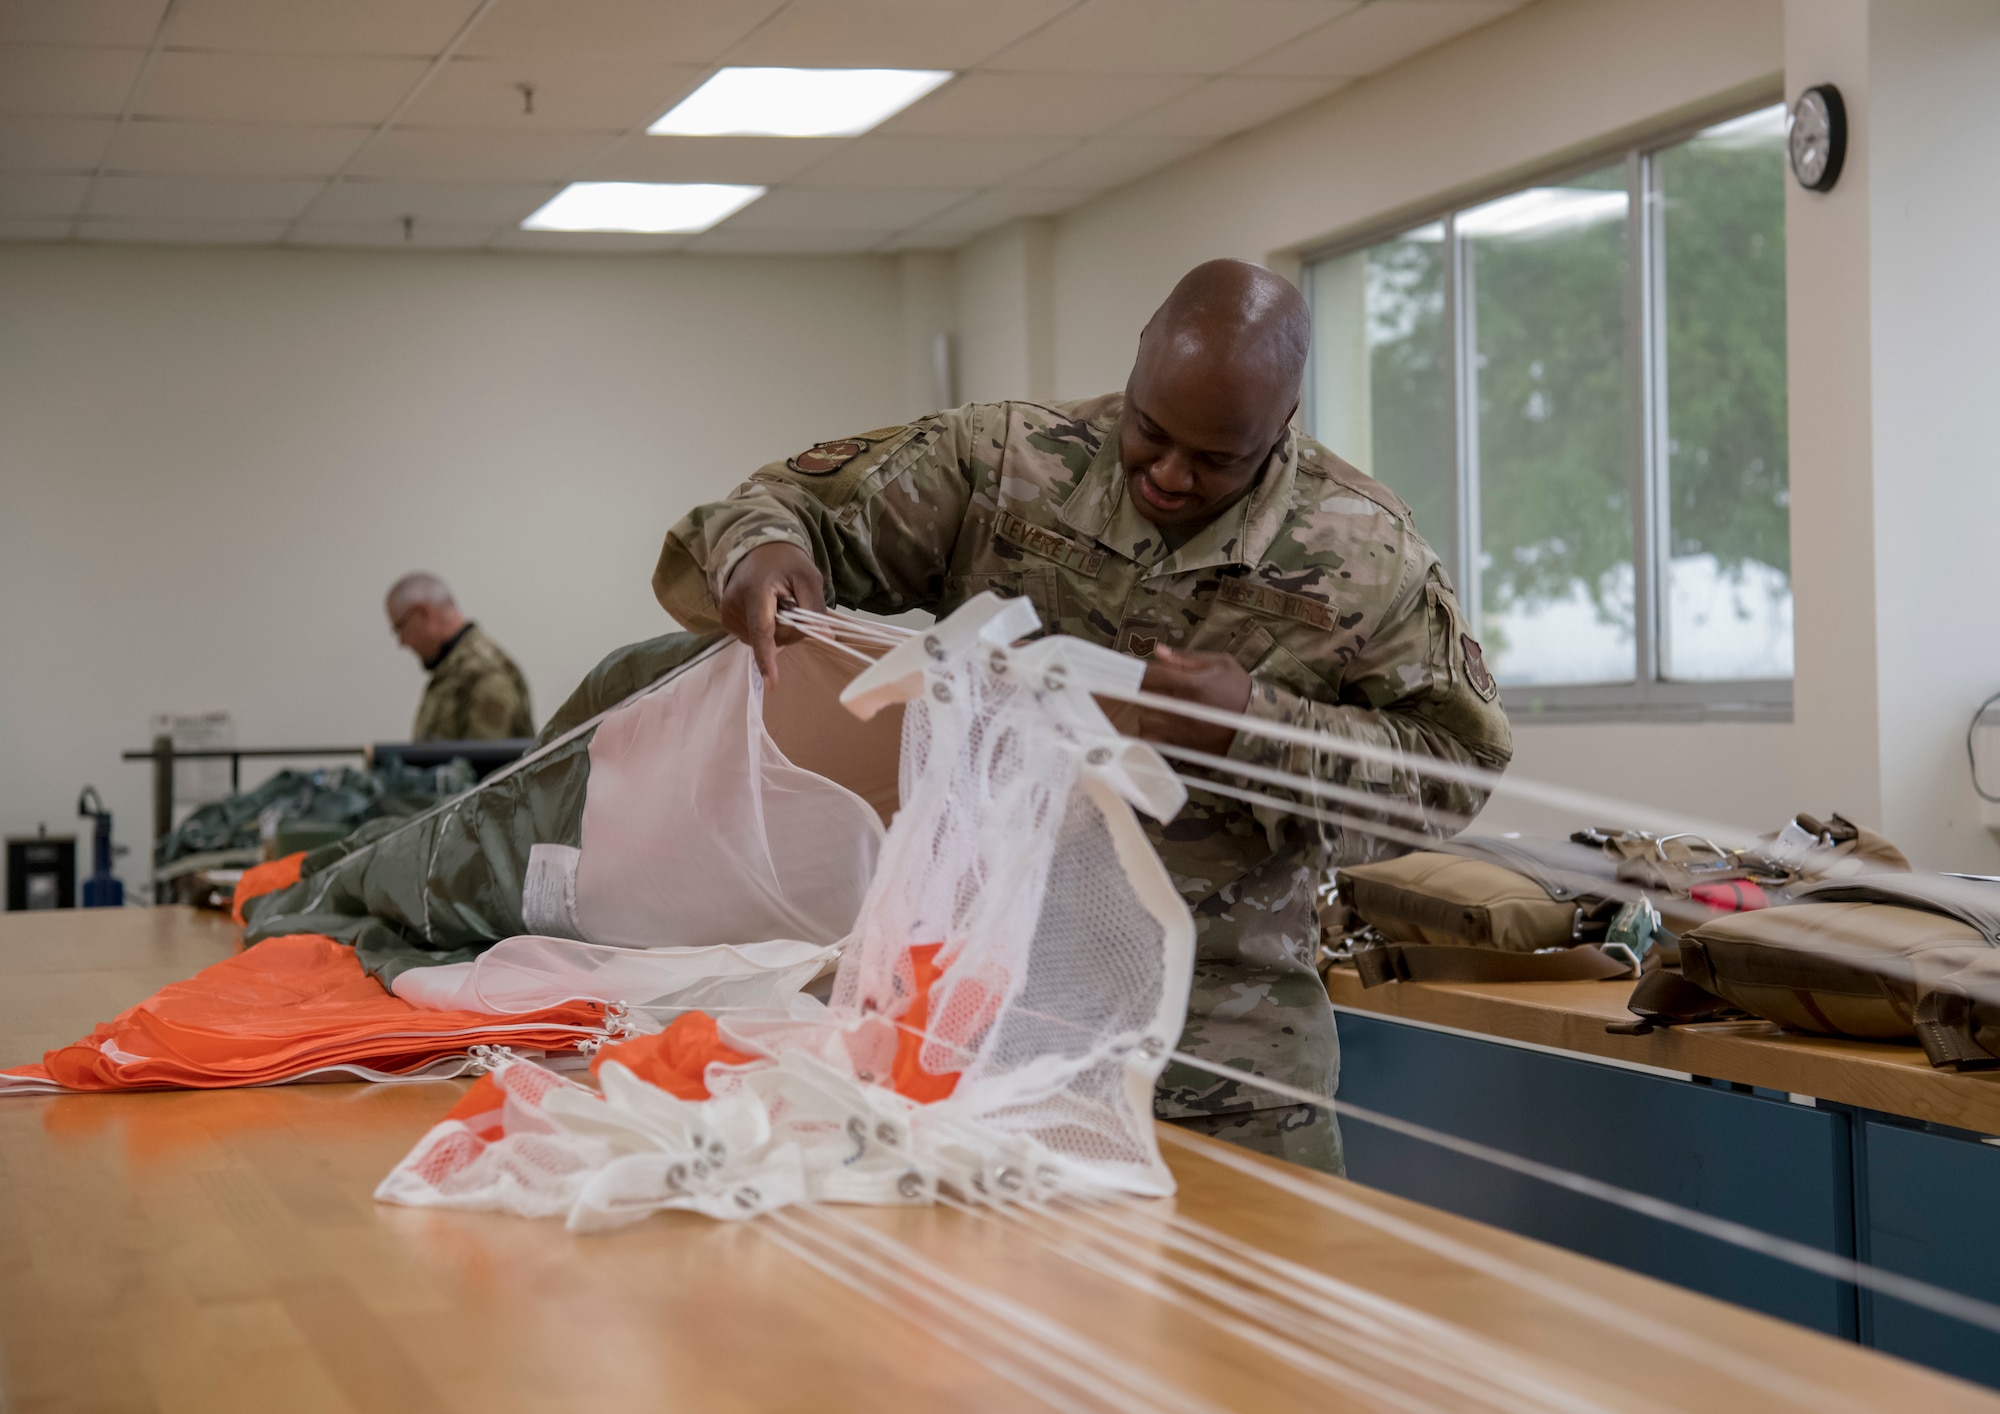 Tech. Sgt. Tyree Leverette, 403rd Operational Support Squadron aircrew flight equipment technician at Keesler Air Force Base, Miss., performs a continuity check on the canopy of a BA-30 Low Profile Parachute system May 2, 2021. The new parachute systems are on track to replace the BA-22s the 53rd Weather Reconnaissance Squadron WC-130Js use in time for the start of hurricane season in June. (U.S. Air Force by Staff Sgt. Kristen Pittman)